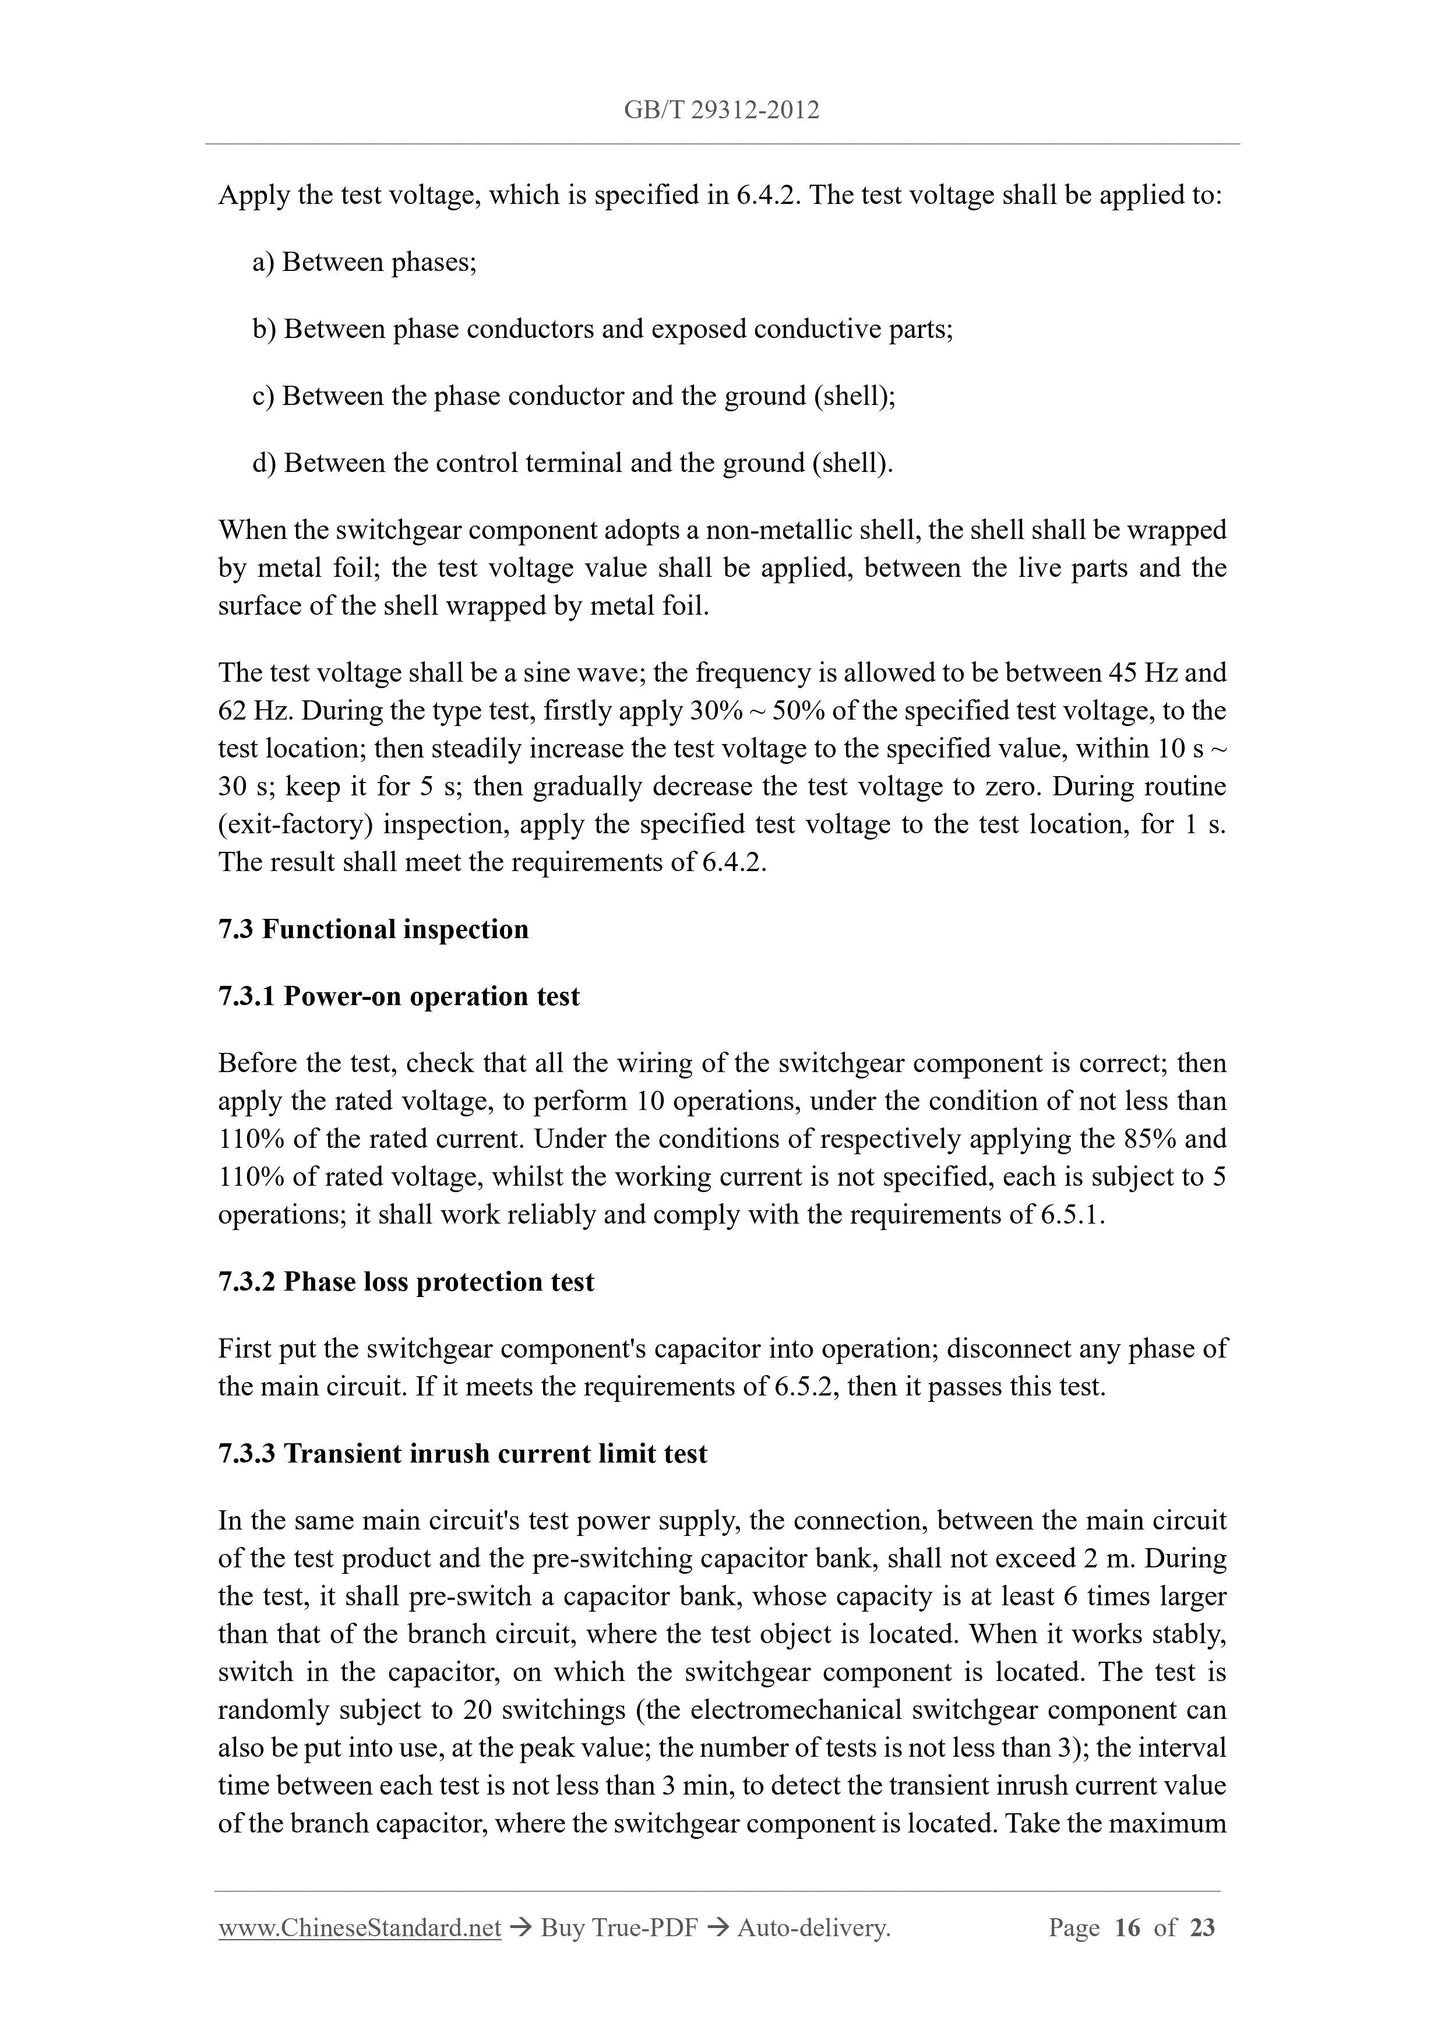 GB/T 29312-2012 Page 9